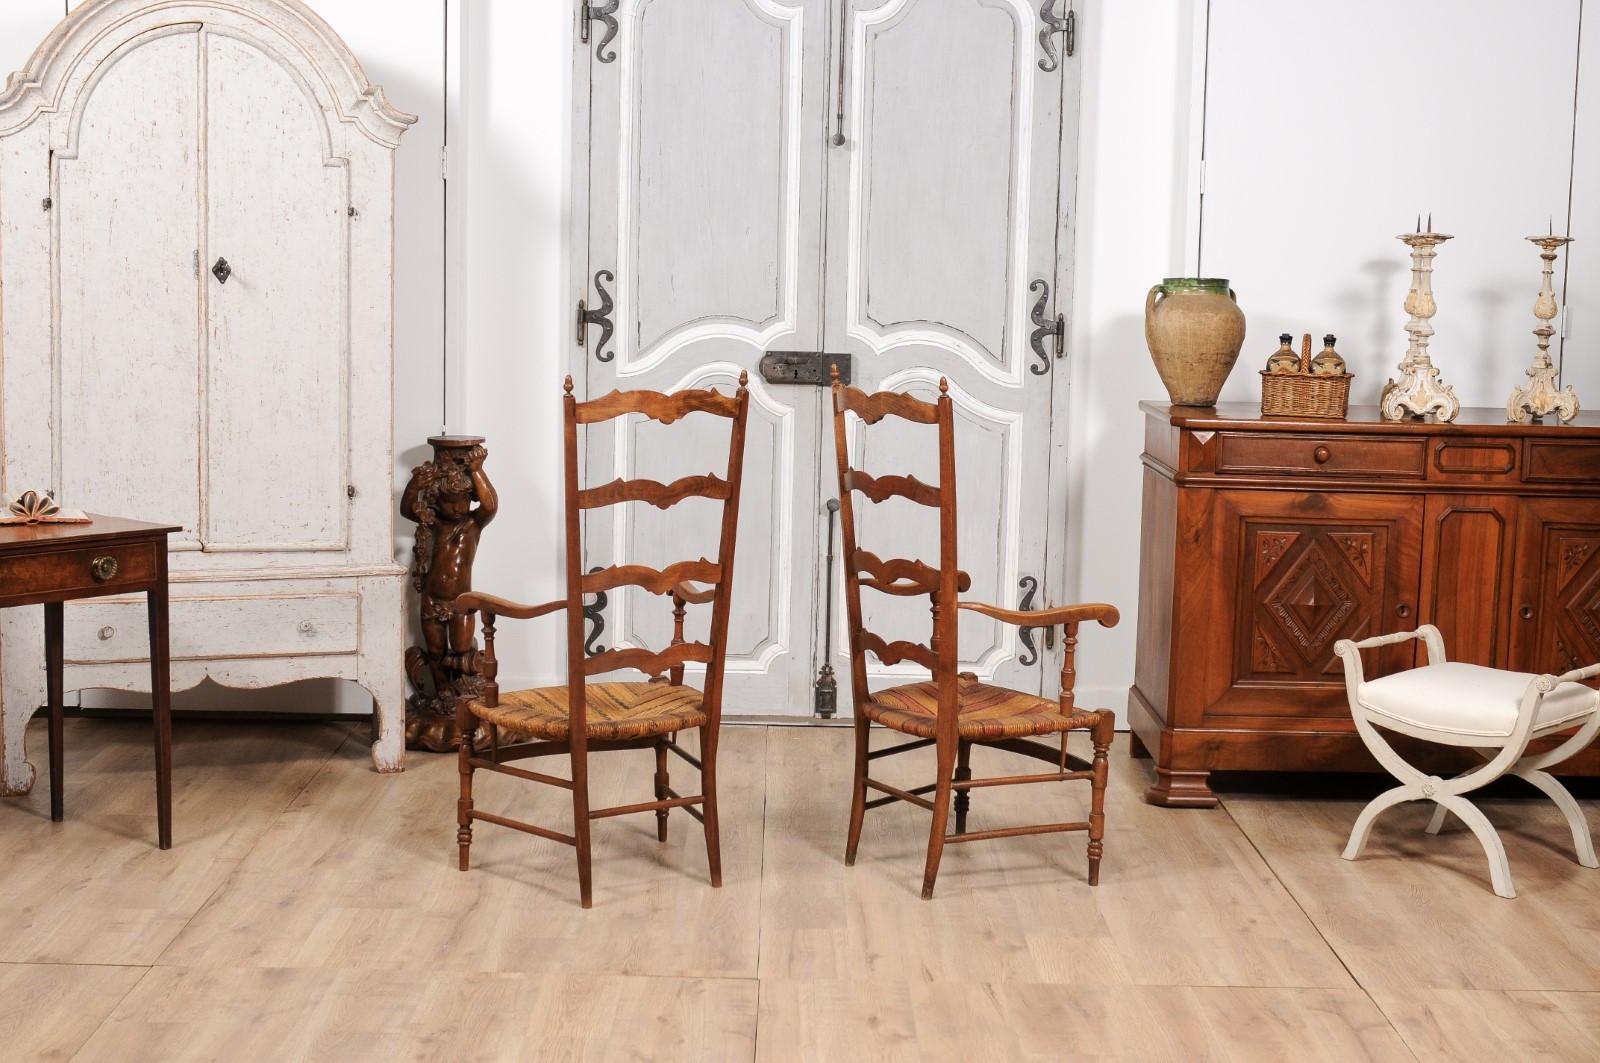 French 1890s Fruitwood Ladder Back Chairs with Straw Seats and Turned Legs For Sale 2